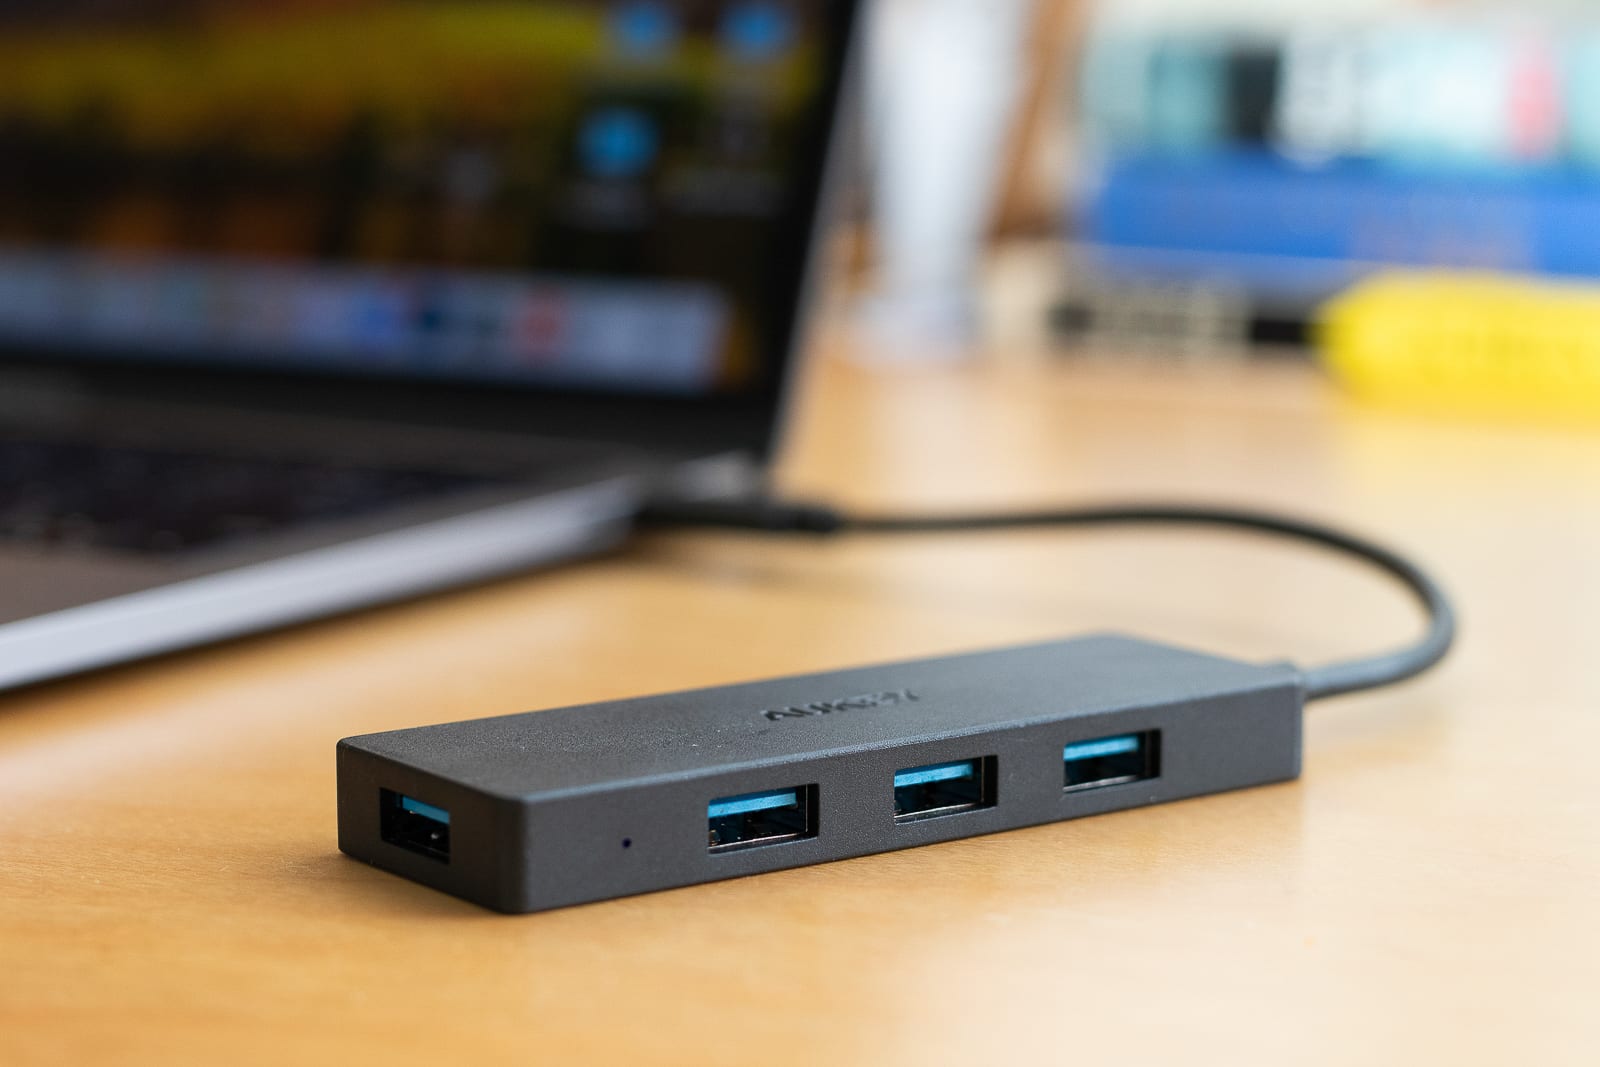 The best and docks | Engadget